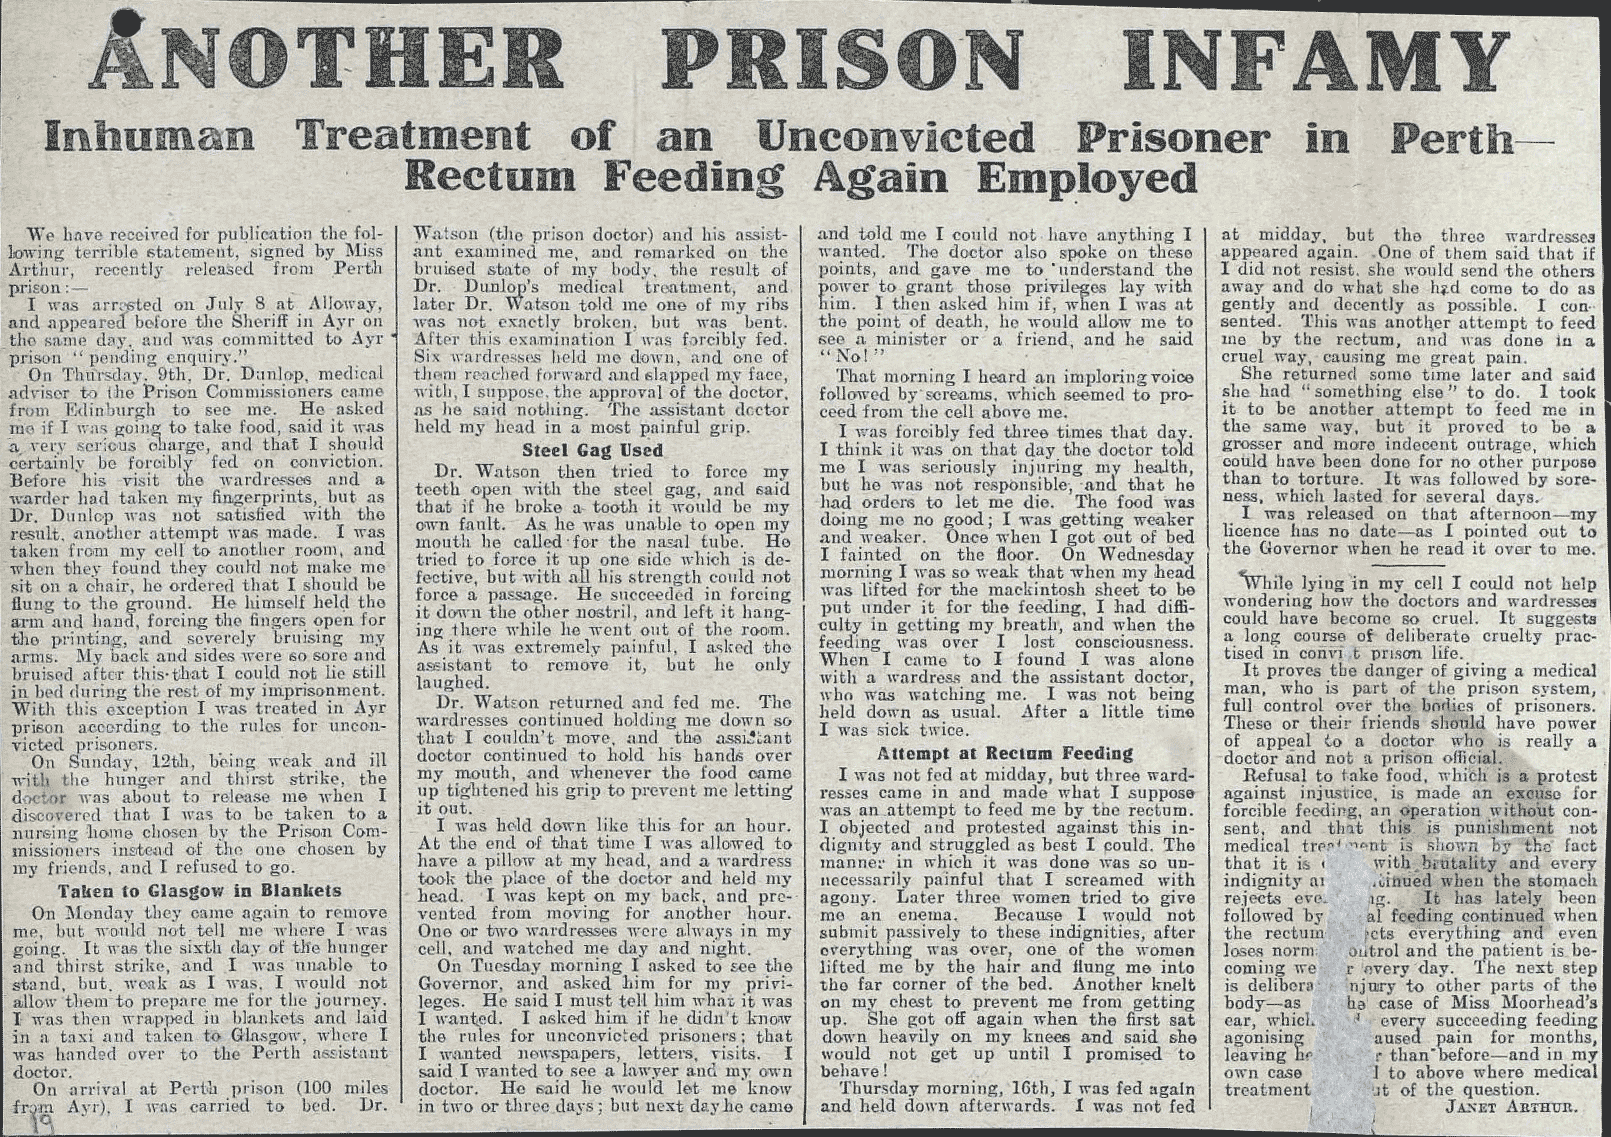 Article by Fanny Parker alias Janet Arthur on the inhuman treatment she received as a prisoner. Published in ‘Votes for Women’ in 1914. Full transcript available in Rich Text Format, 20KB, using the link above or below the image. (National Records of Scotland reference: HH16/43/6).